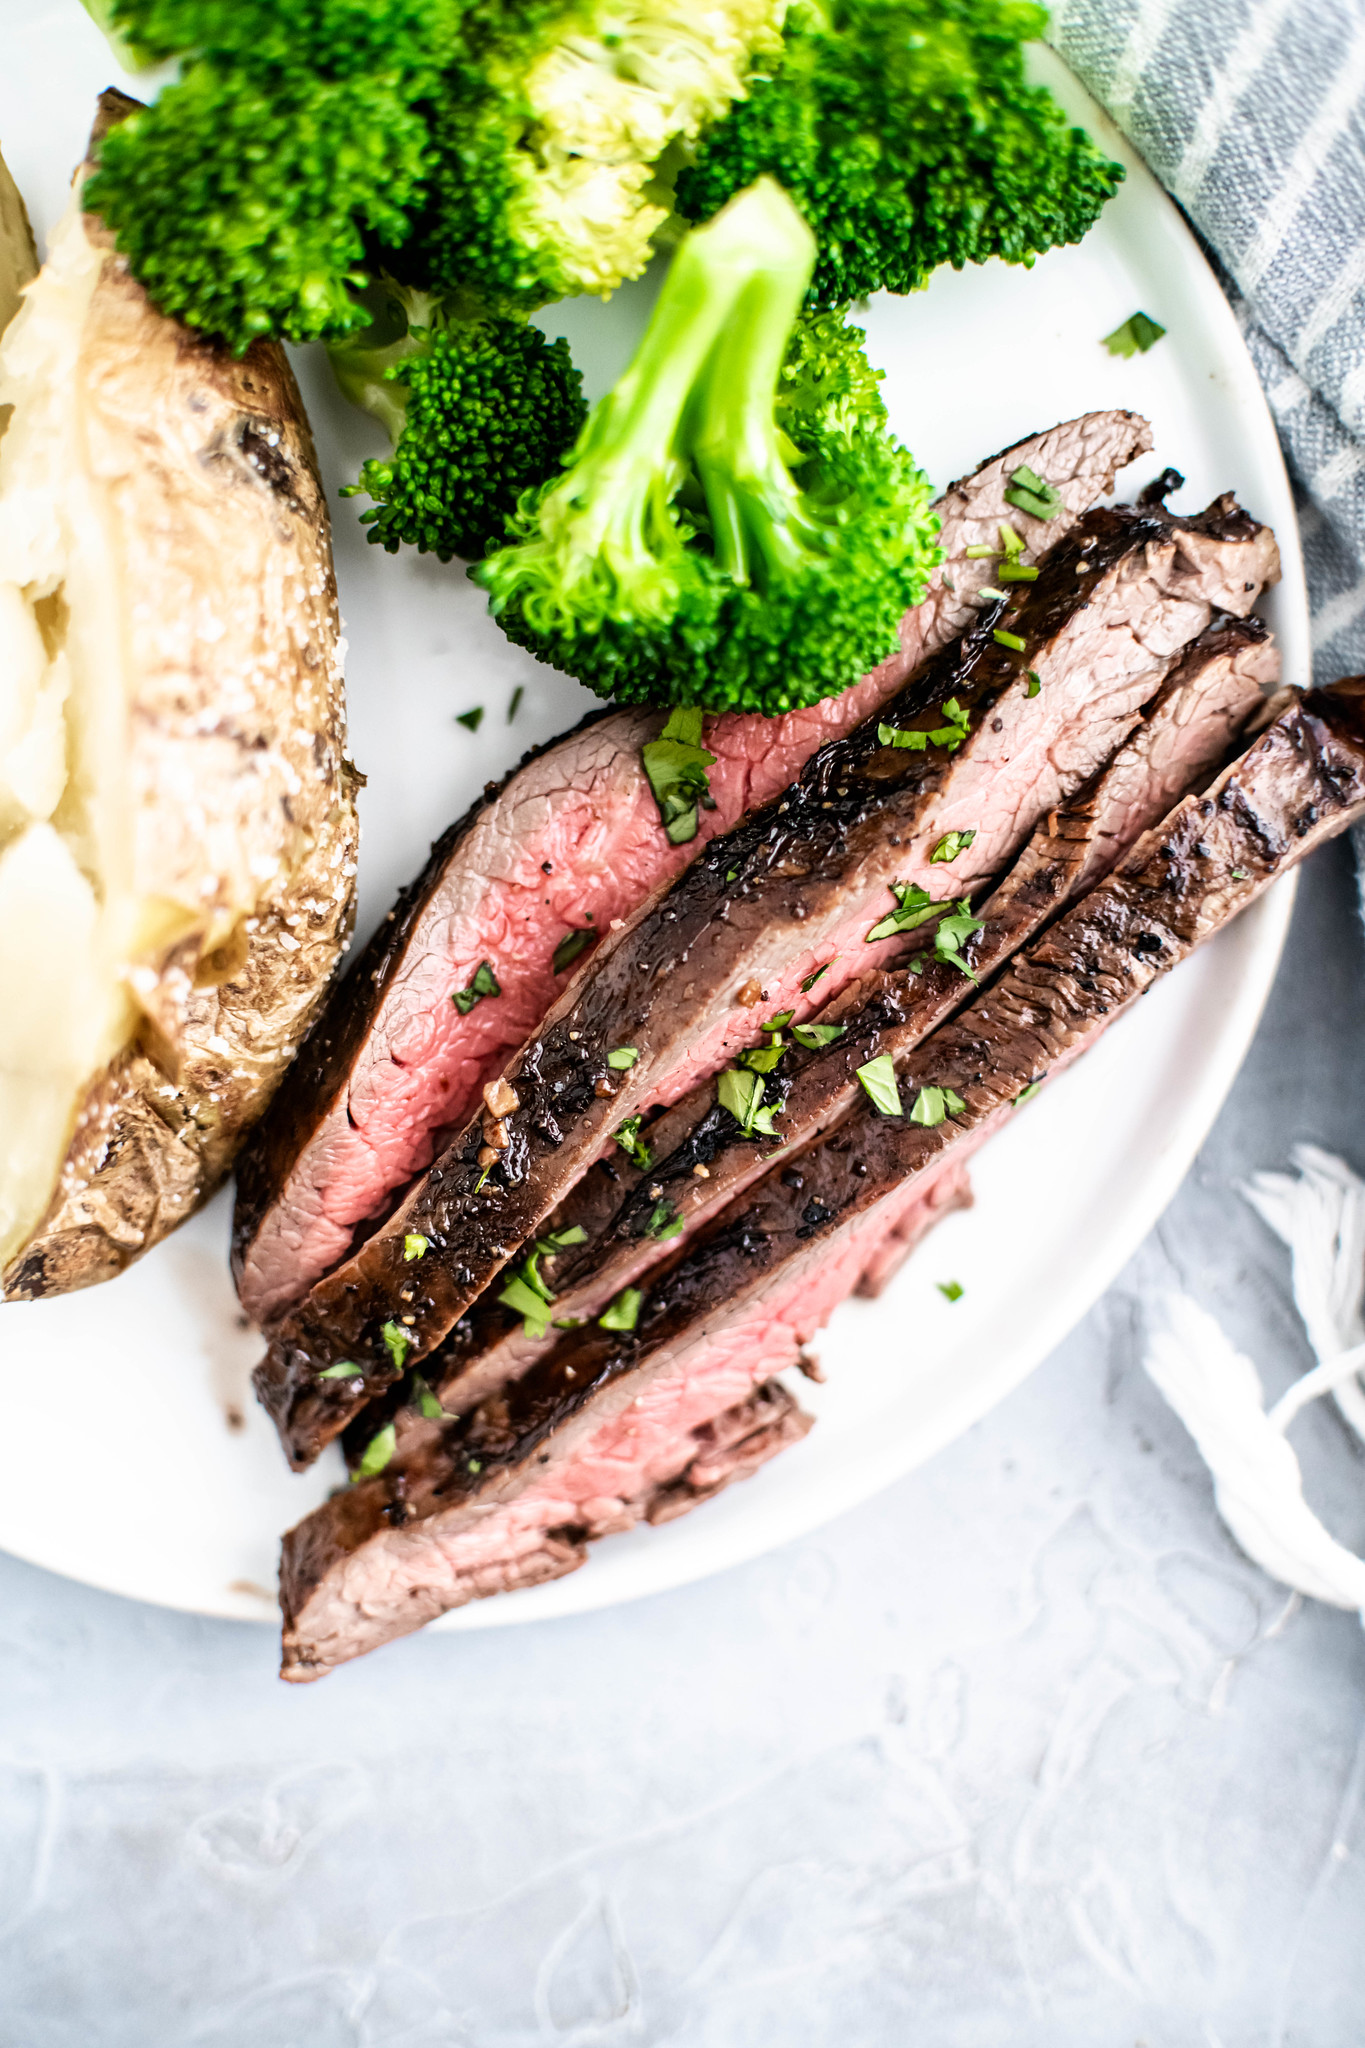 Thinly sliced flank steak on a plate with a baked potato and steamed broccoli.